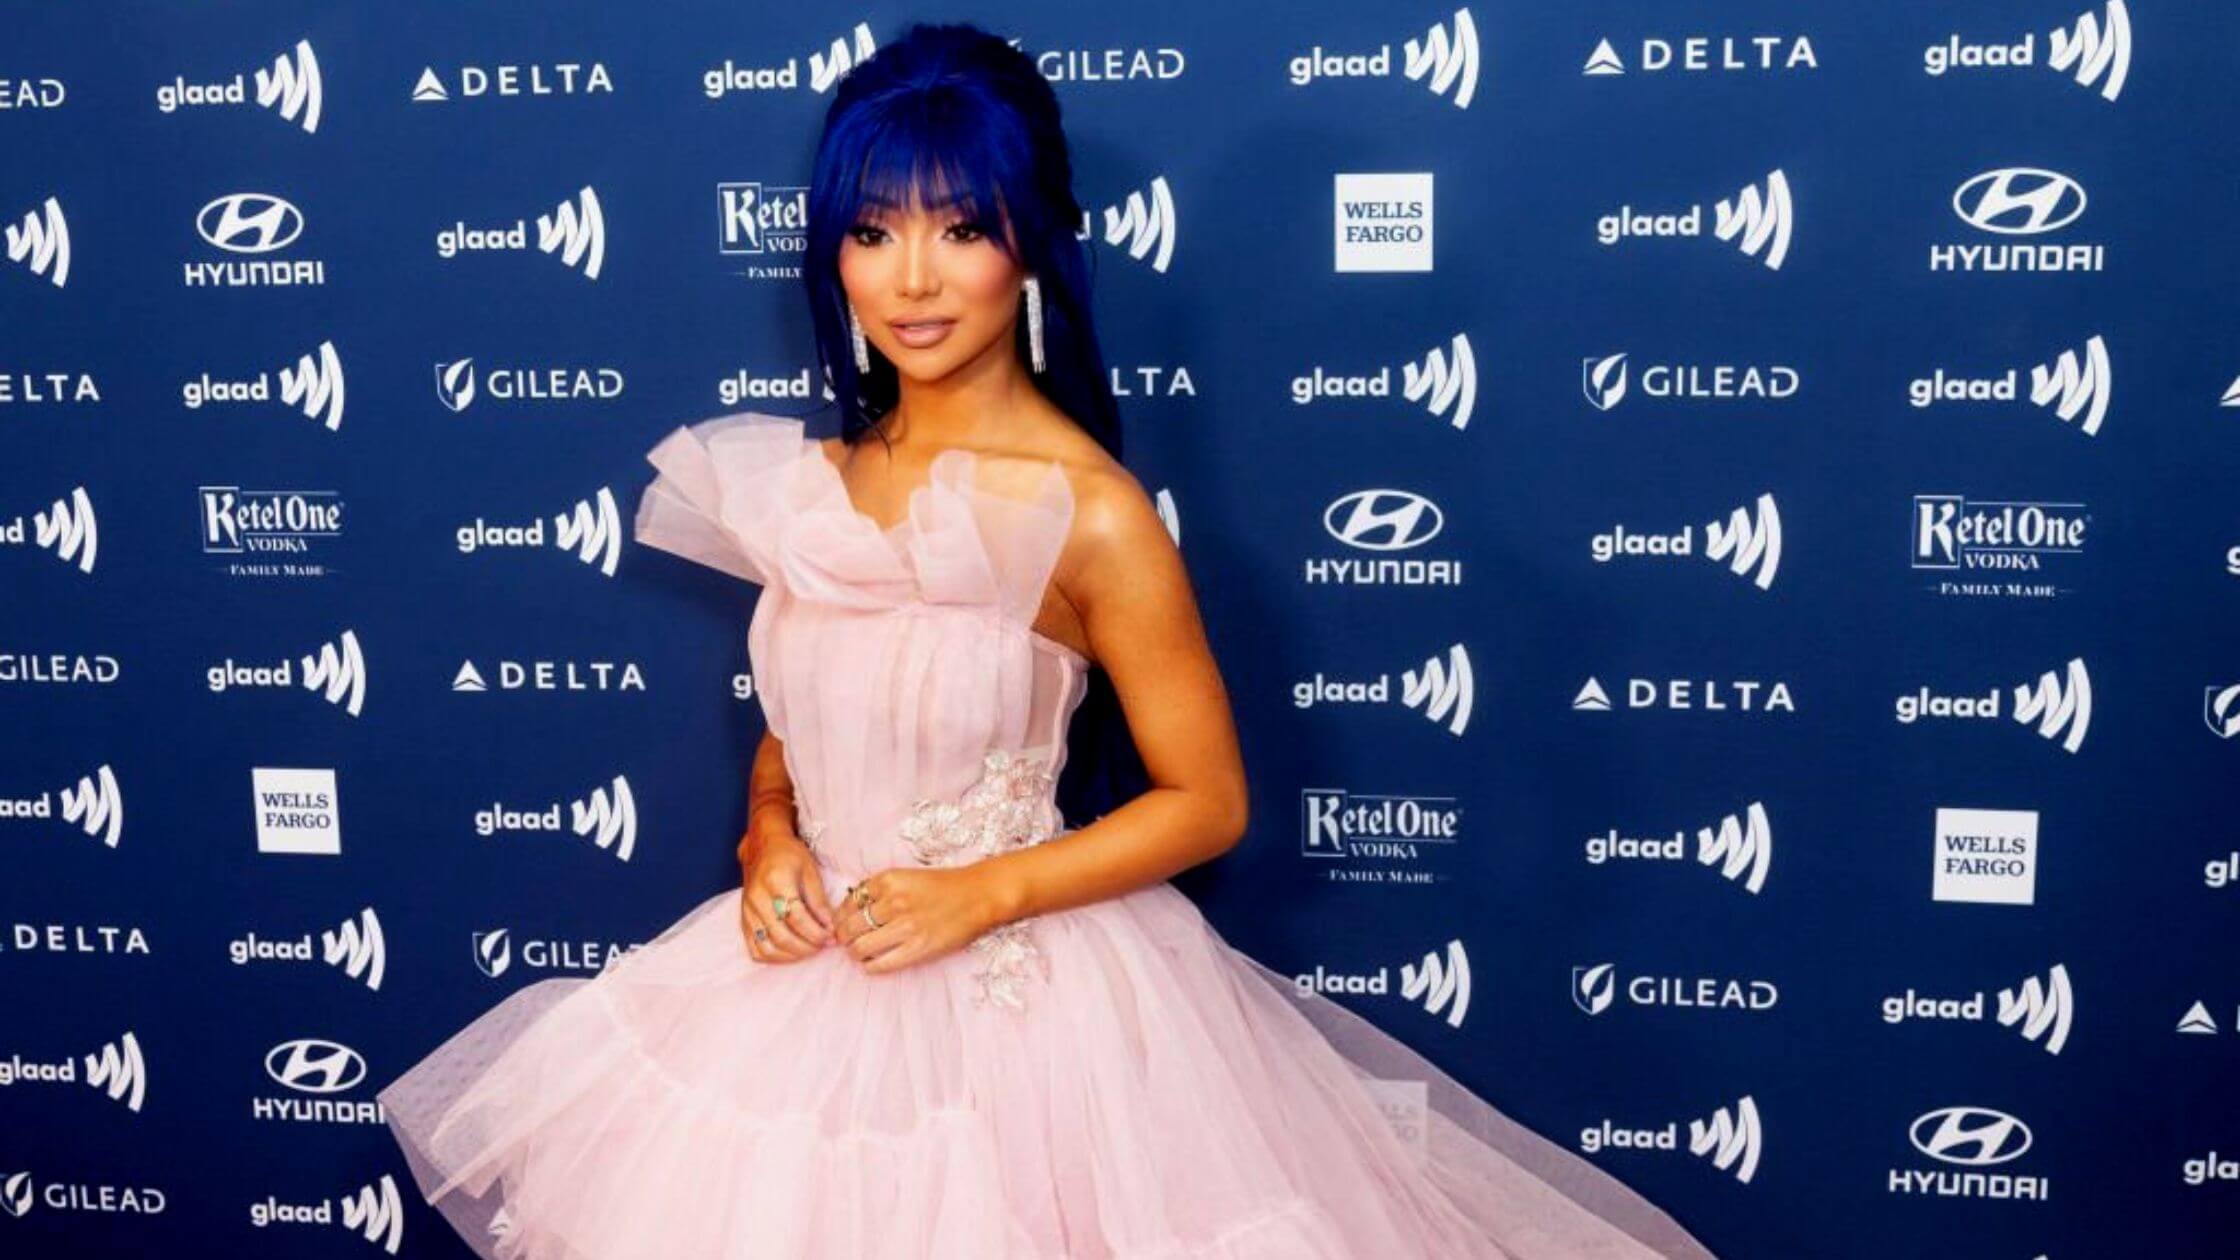 Nikita Dragun Is Detained And Lodged In The Florida Prison For Men